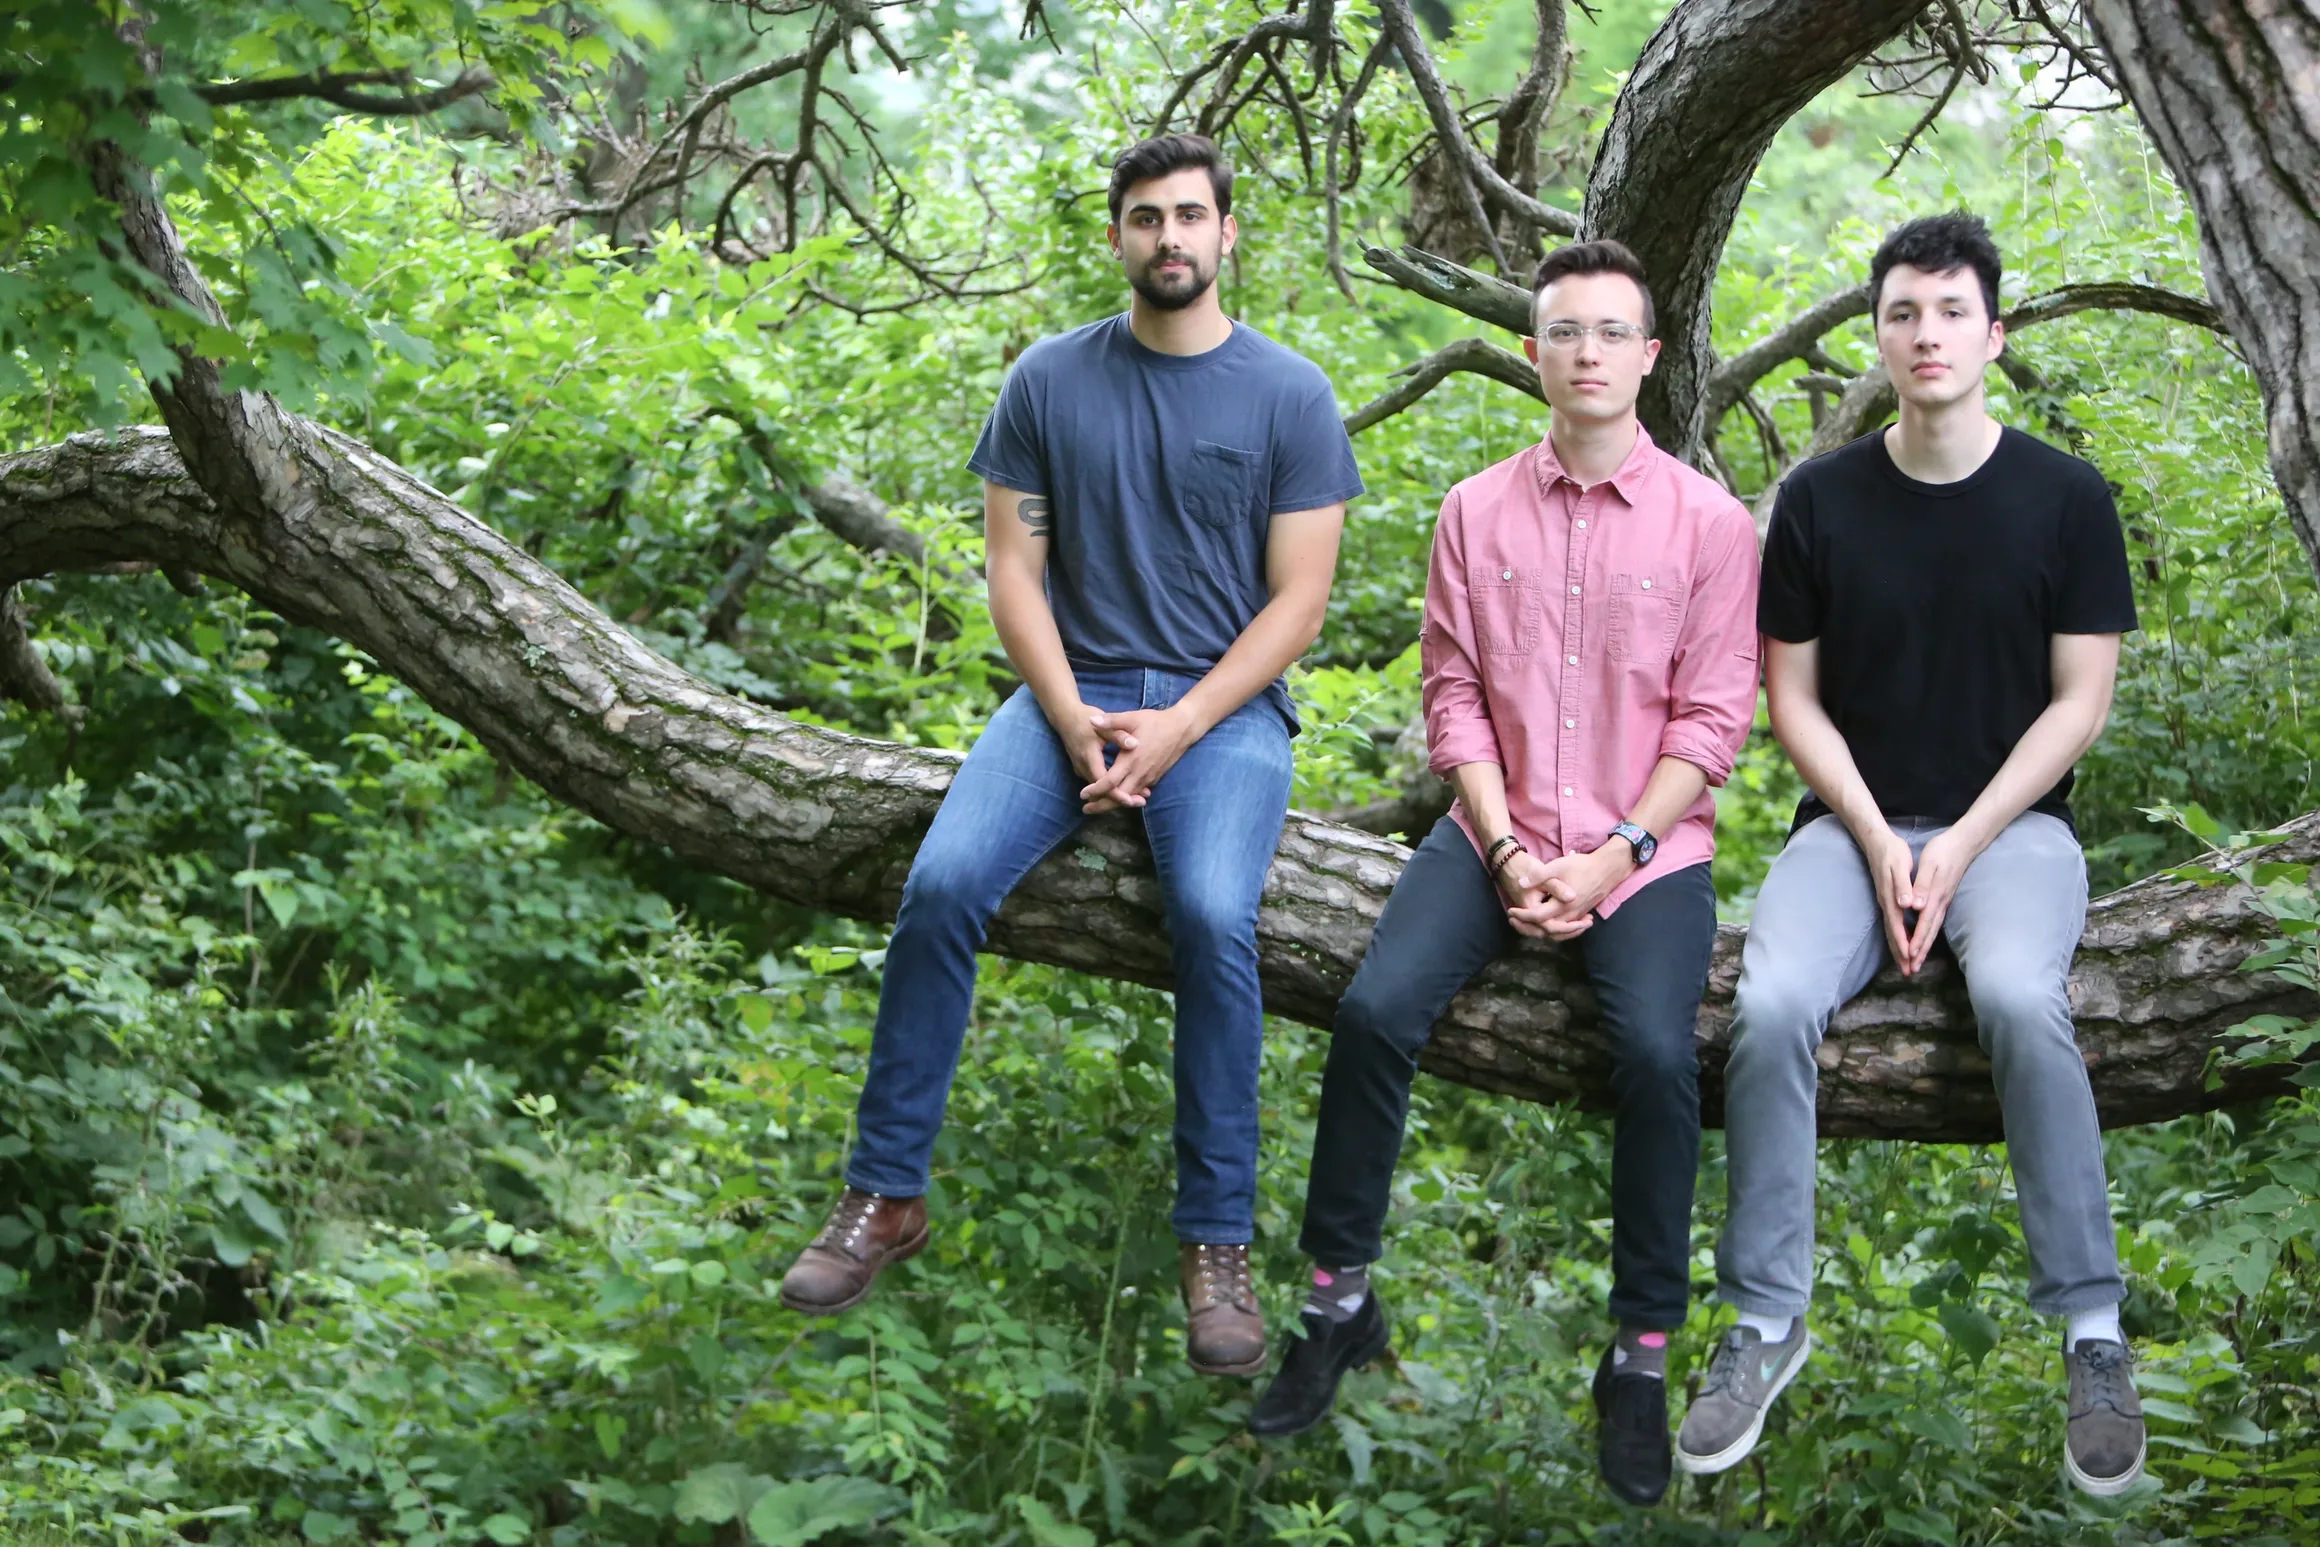 Quartet group photo with members sitting on a hanging branch from a tree